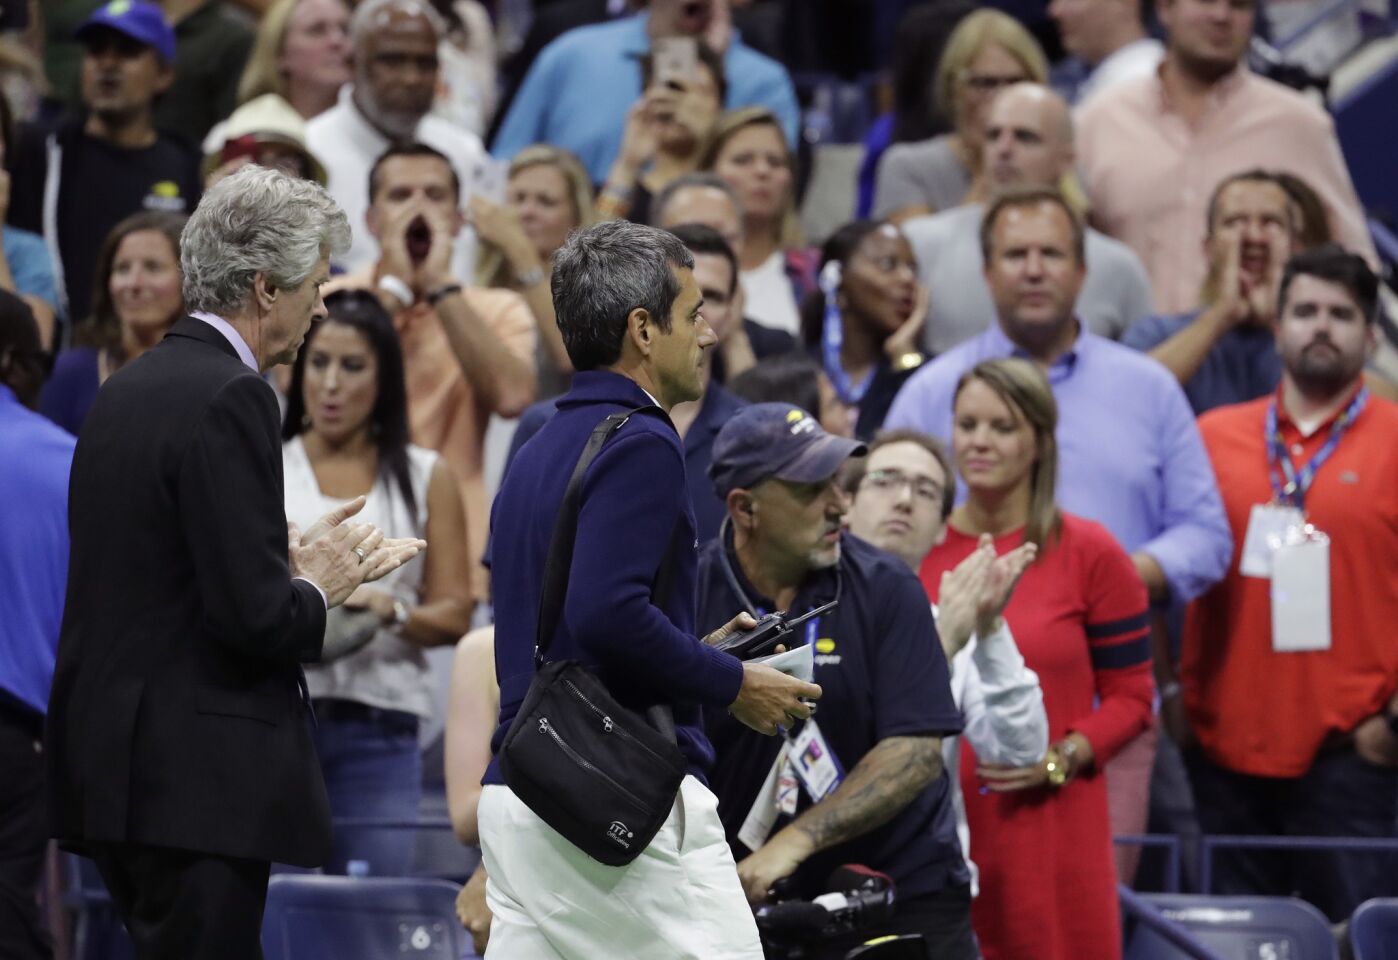 Chair umpire Carlos Ramos, right, is lead off the court by referee Brian Earley after Naomi Osaka, of Japan, defeated Serena Williams in the women's final of the U.S. Open tennis tournament, Saturday, Sept. 8, 2018, in New York. (AP Photo/Julio Cortez)